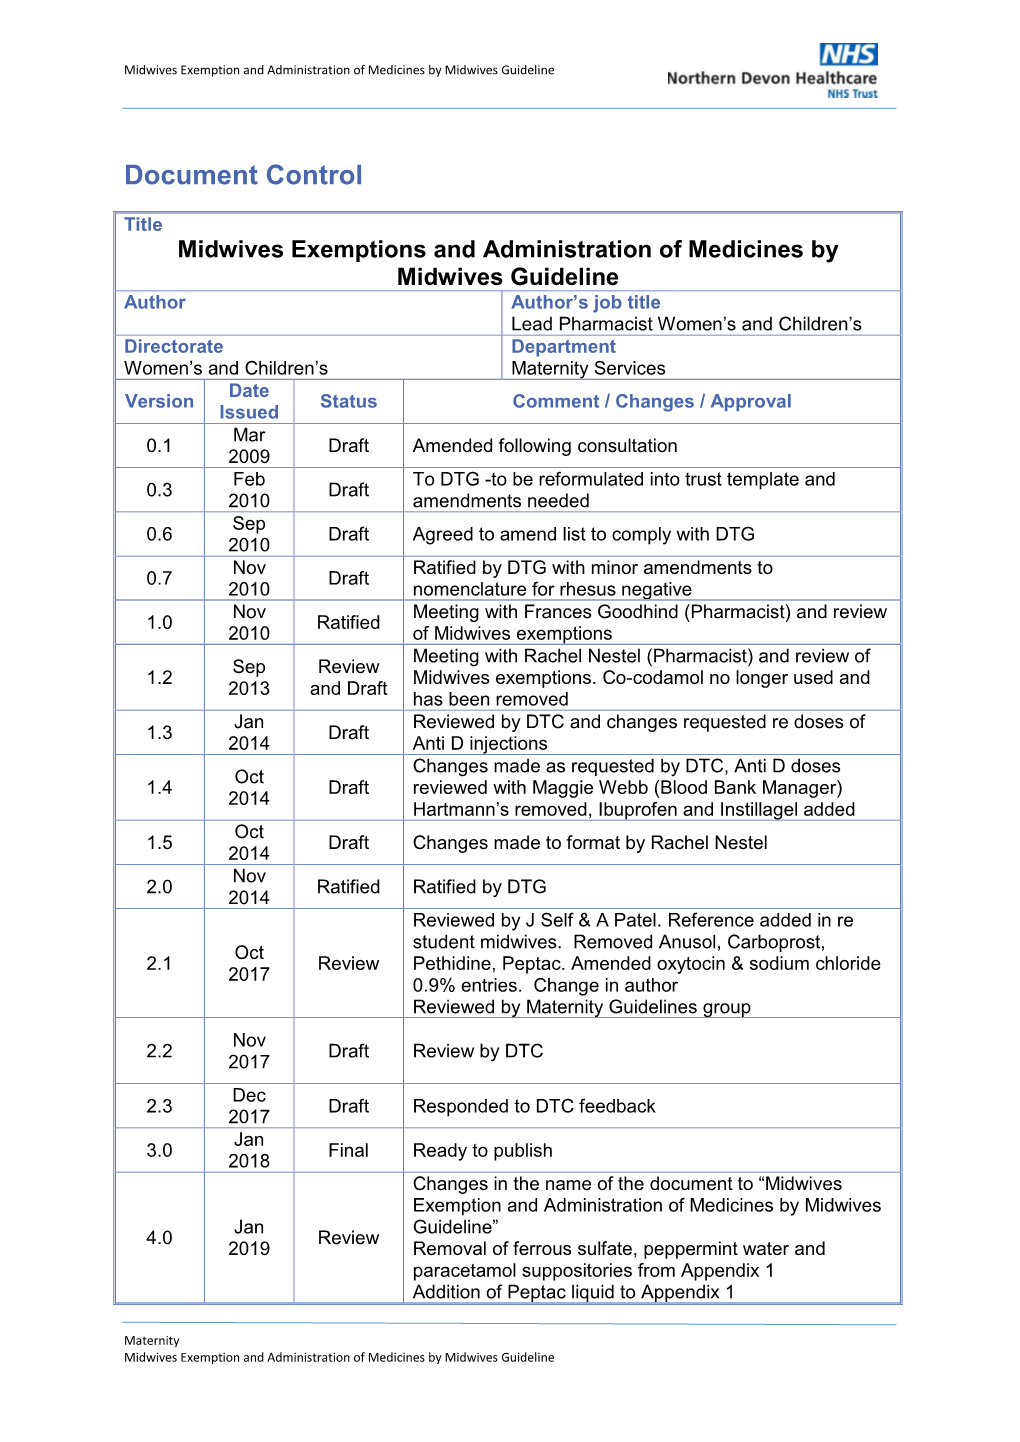 Midwives Exemption and Administration of Medicines by Midwives Guideline